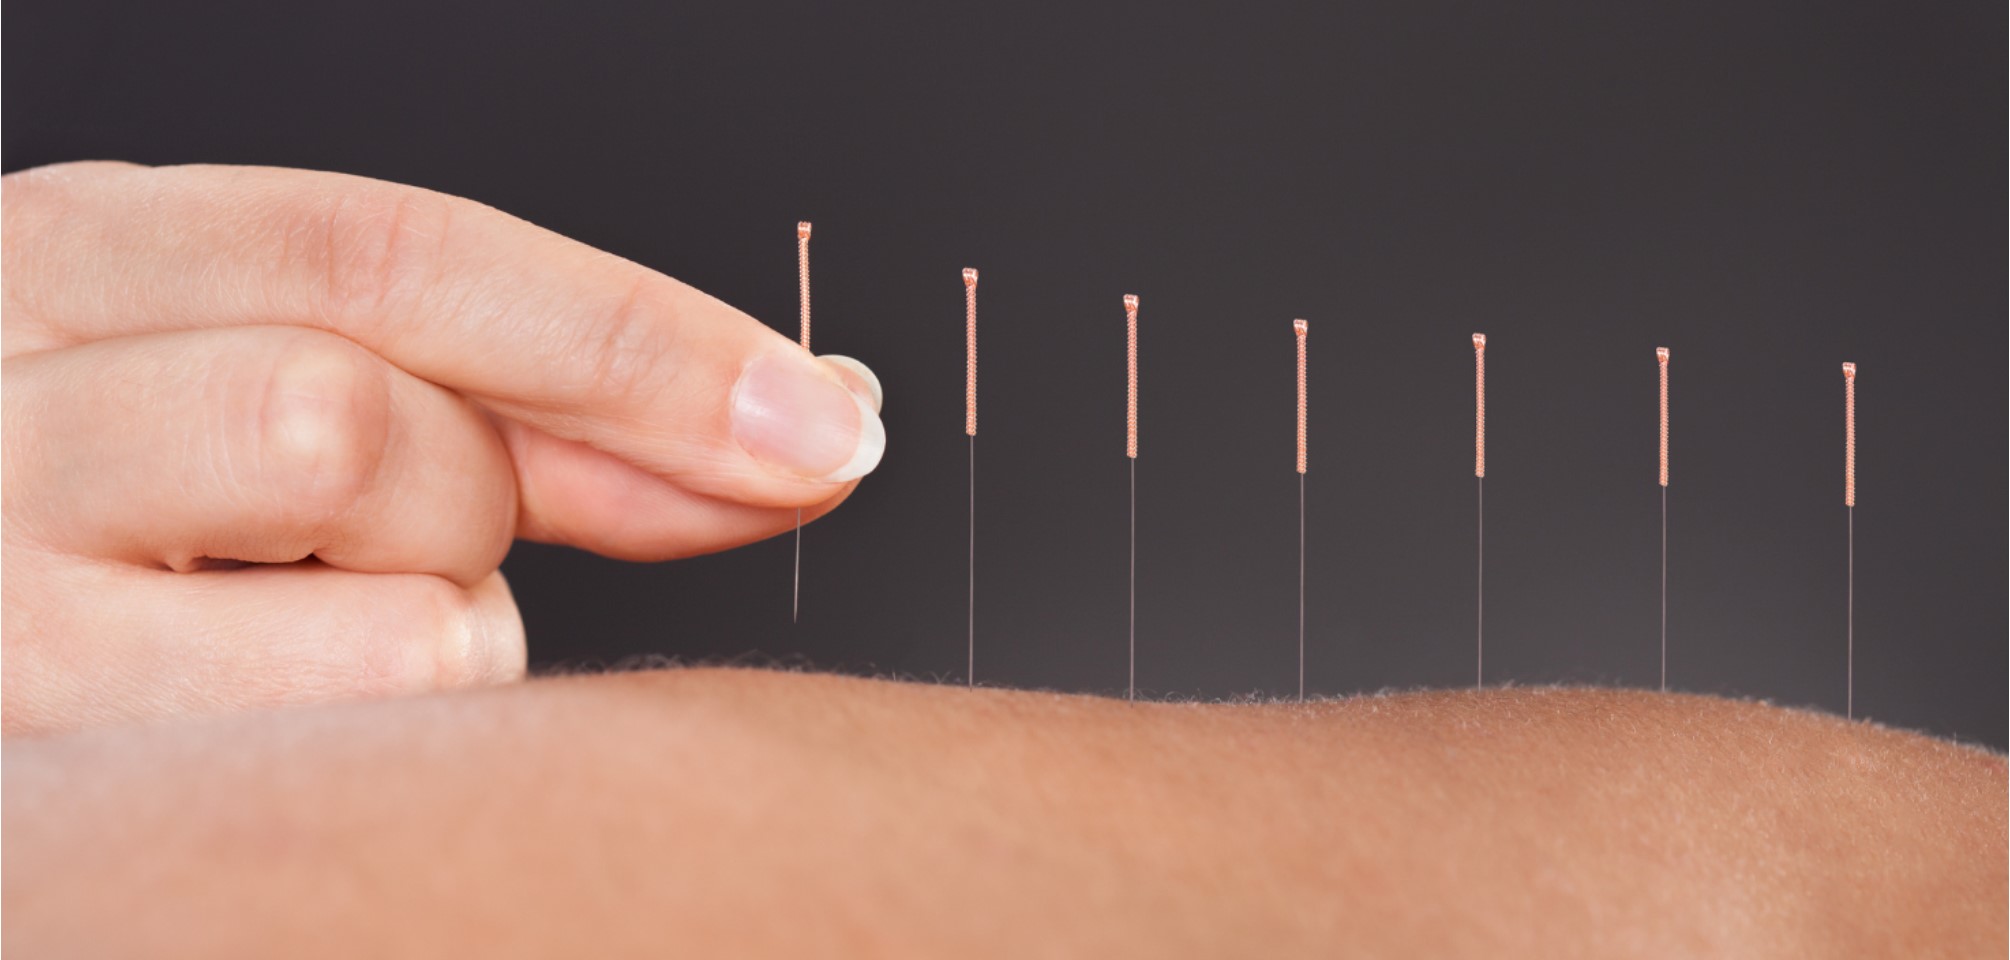 Using Acupuncture for Fertility Treatment